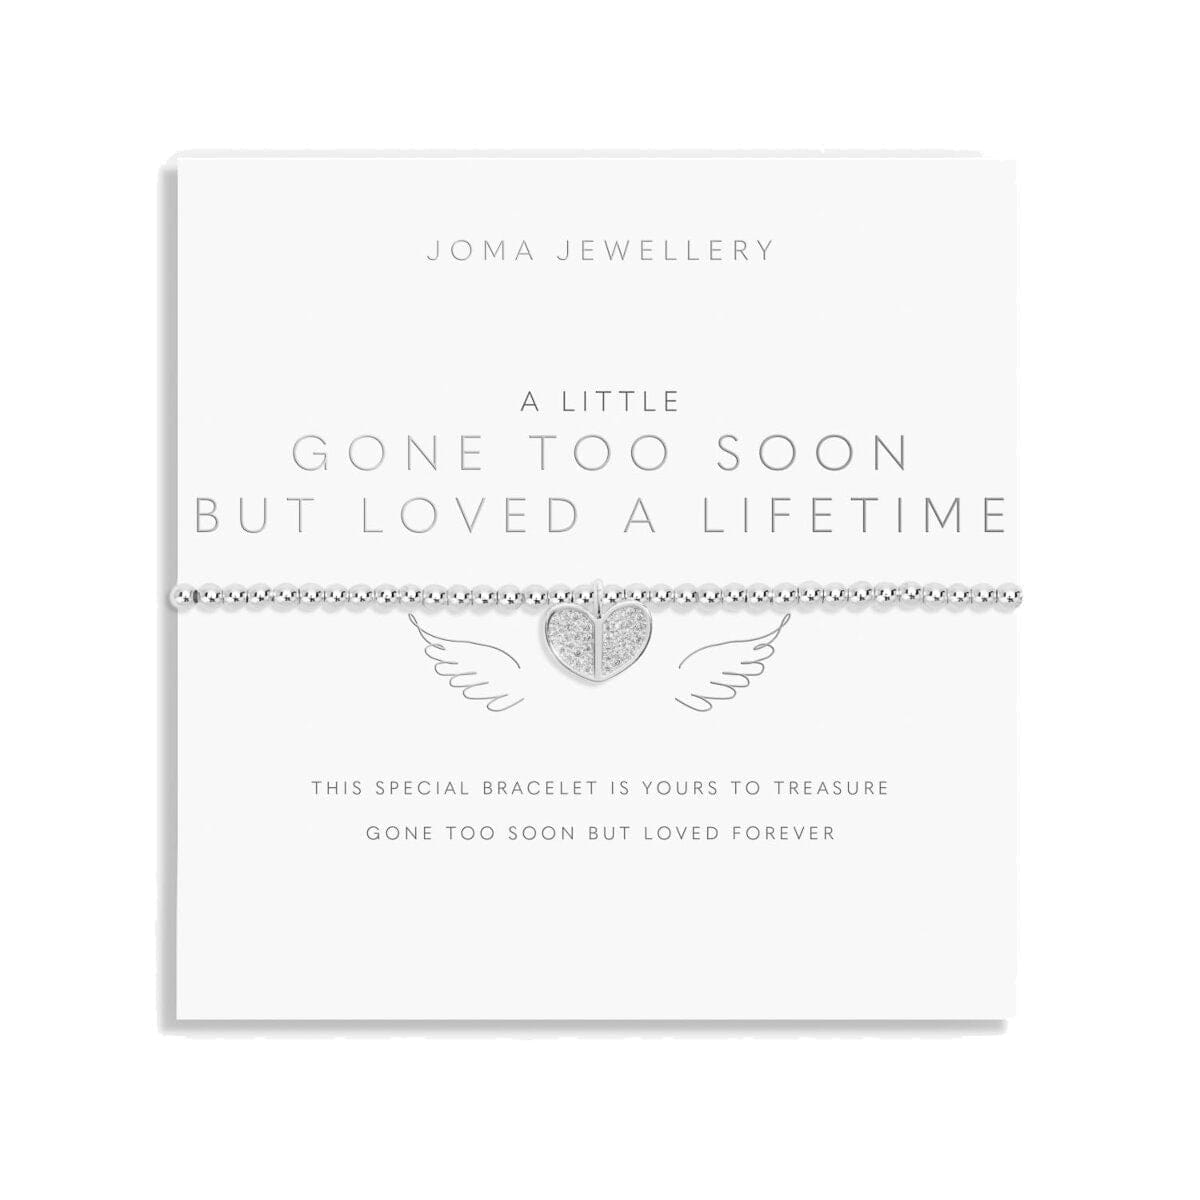 Joma Jewellery Bracelet Joma Jewellery Bracelet - A Little Gone Too Soon But Loved A Lifetime